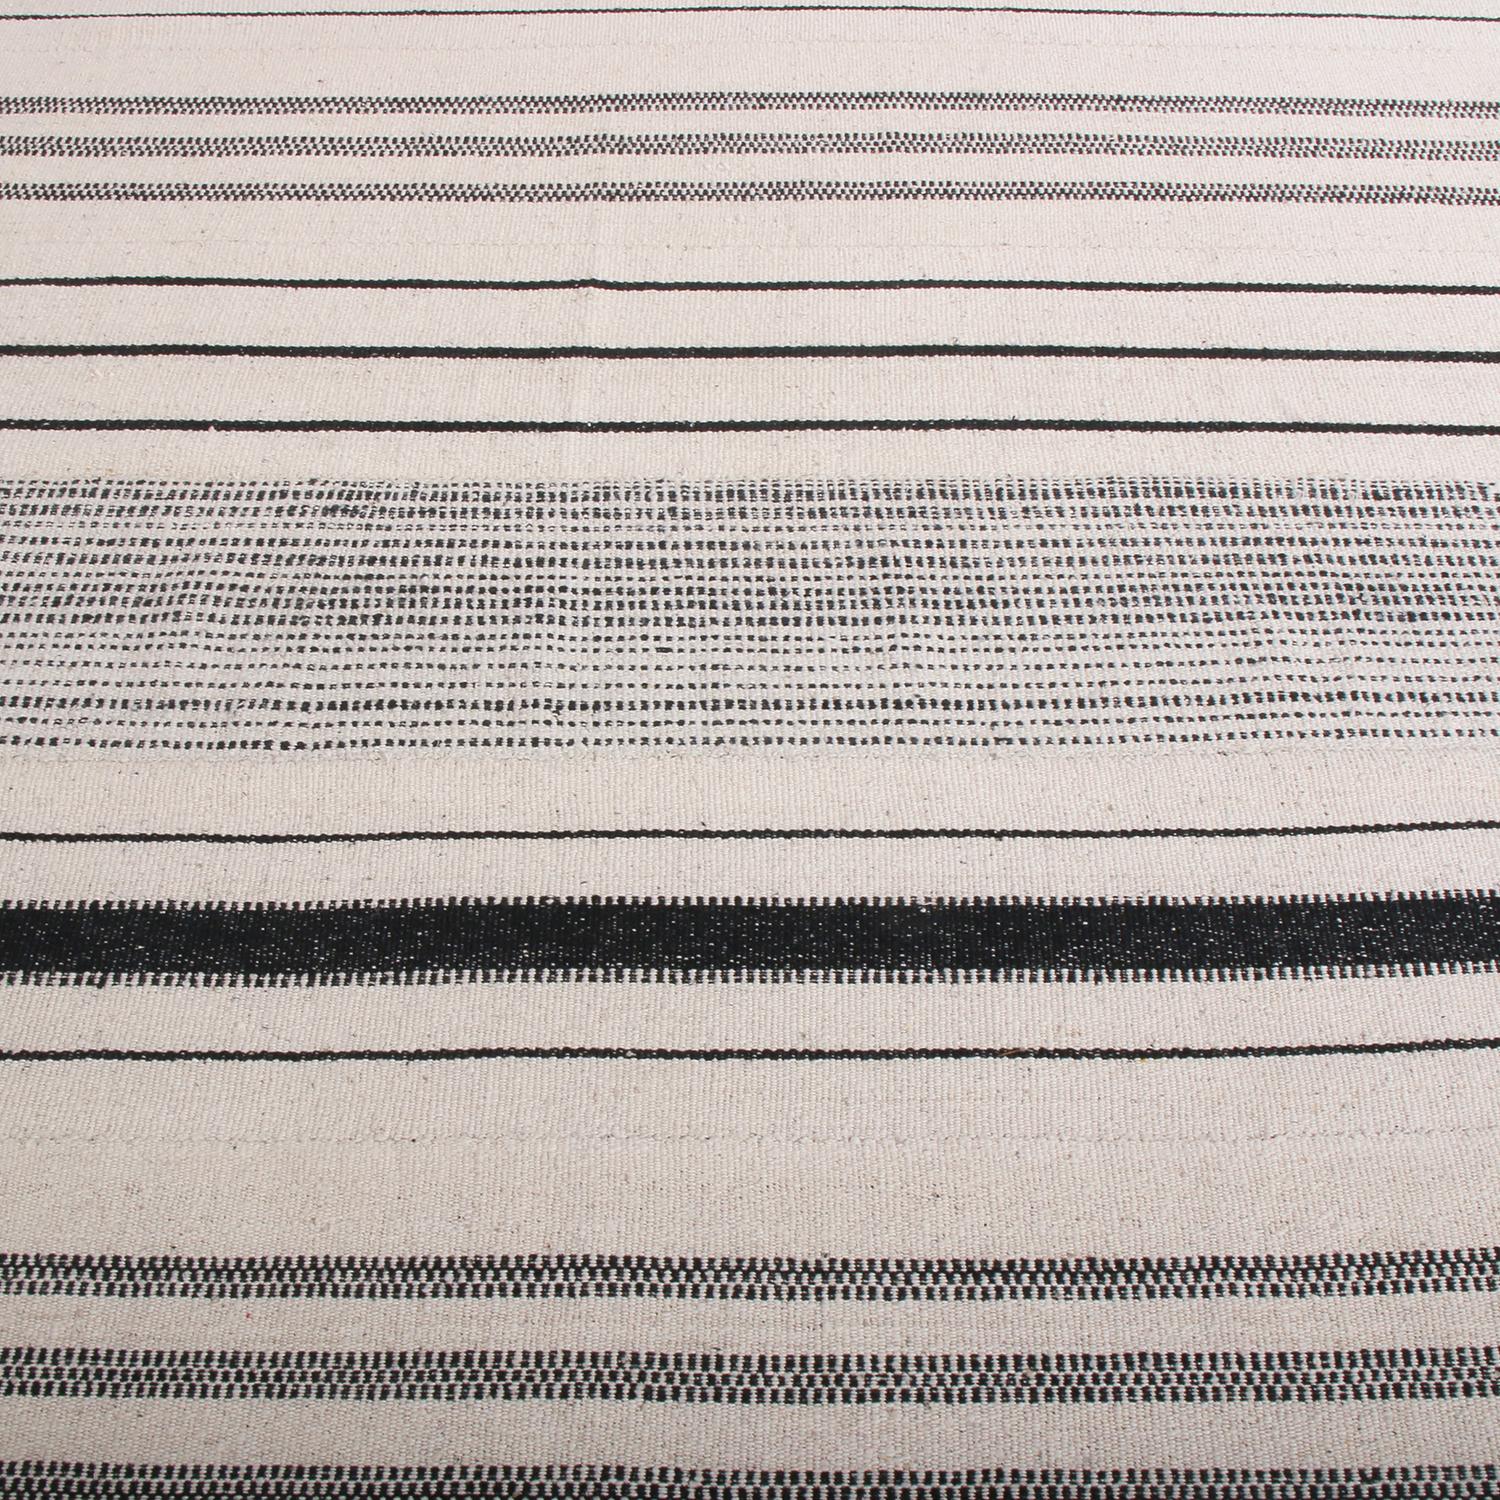 Vintage Turkish Kilim Rug in Black & White Striped Pattern by Rug & Kilim In Good Condition For Sale In Long Island City, NY